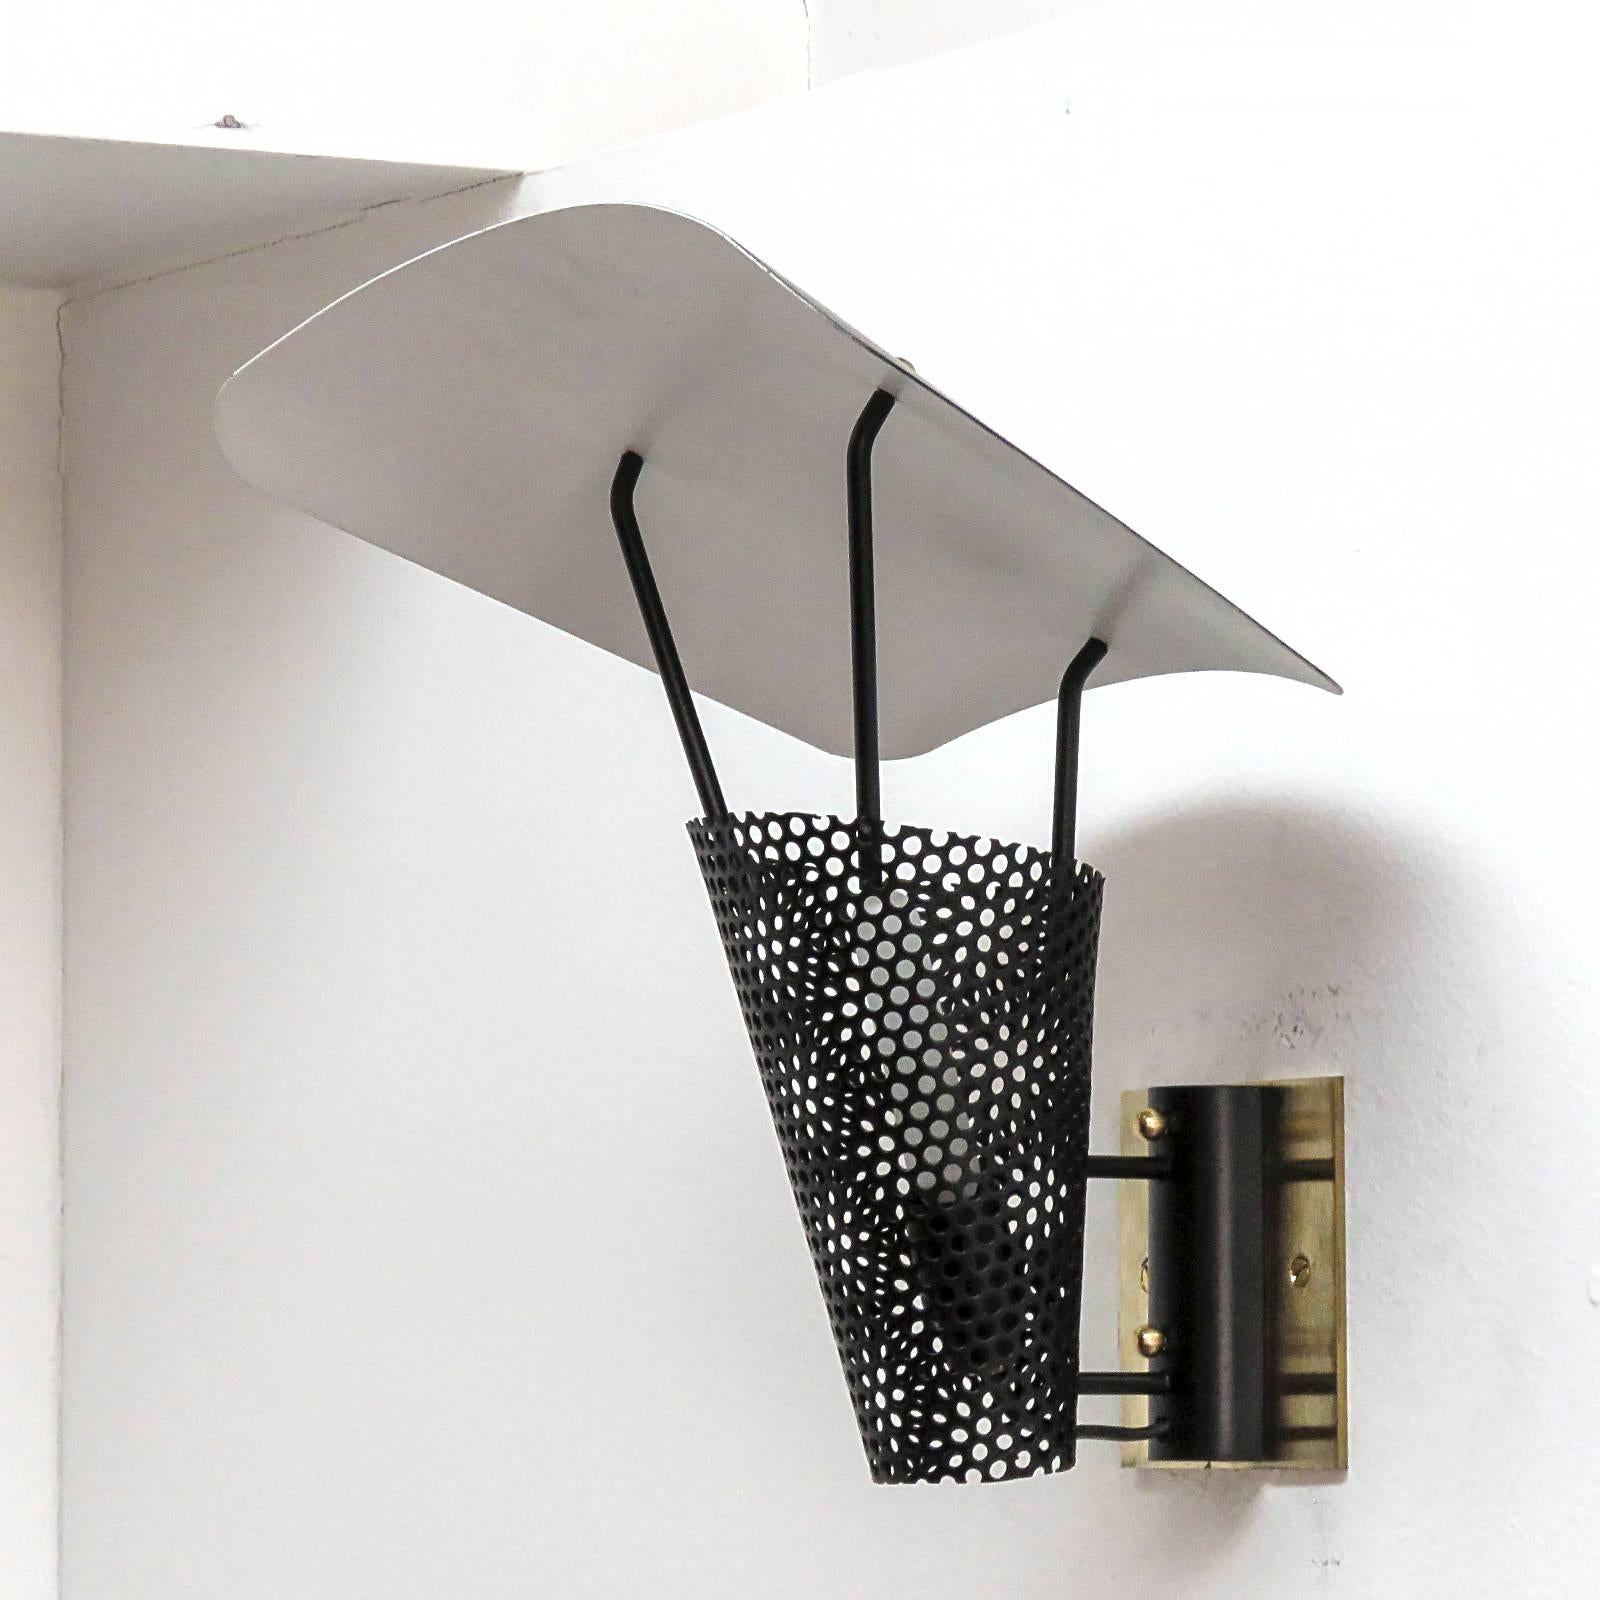 Iconic pair of French wall lights by Jacques Biny in black and white enameled and perforated metal with brass accents and solid brass back plates, one E12 socket per fixture, max. wattage 60w each, bulbs provided as a one time courtesy.